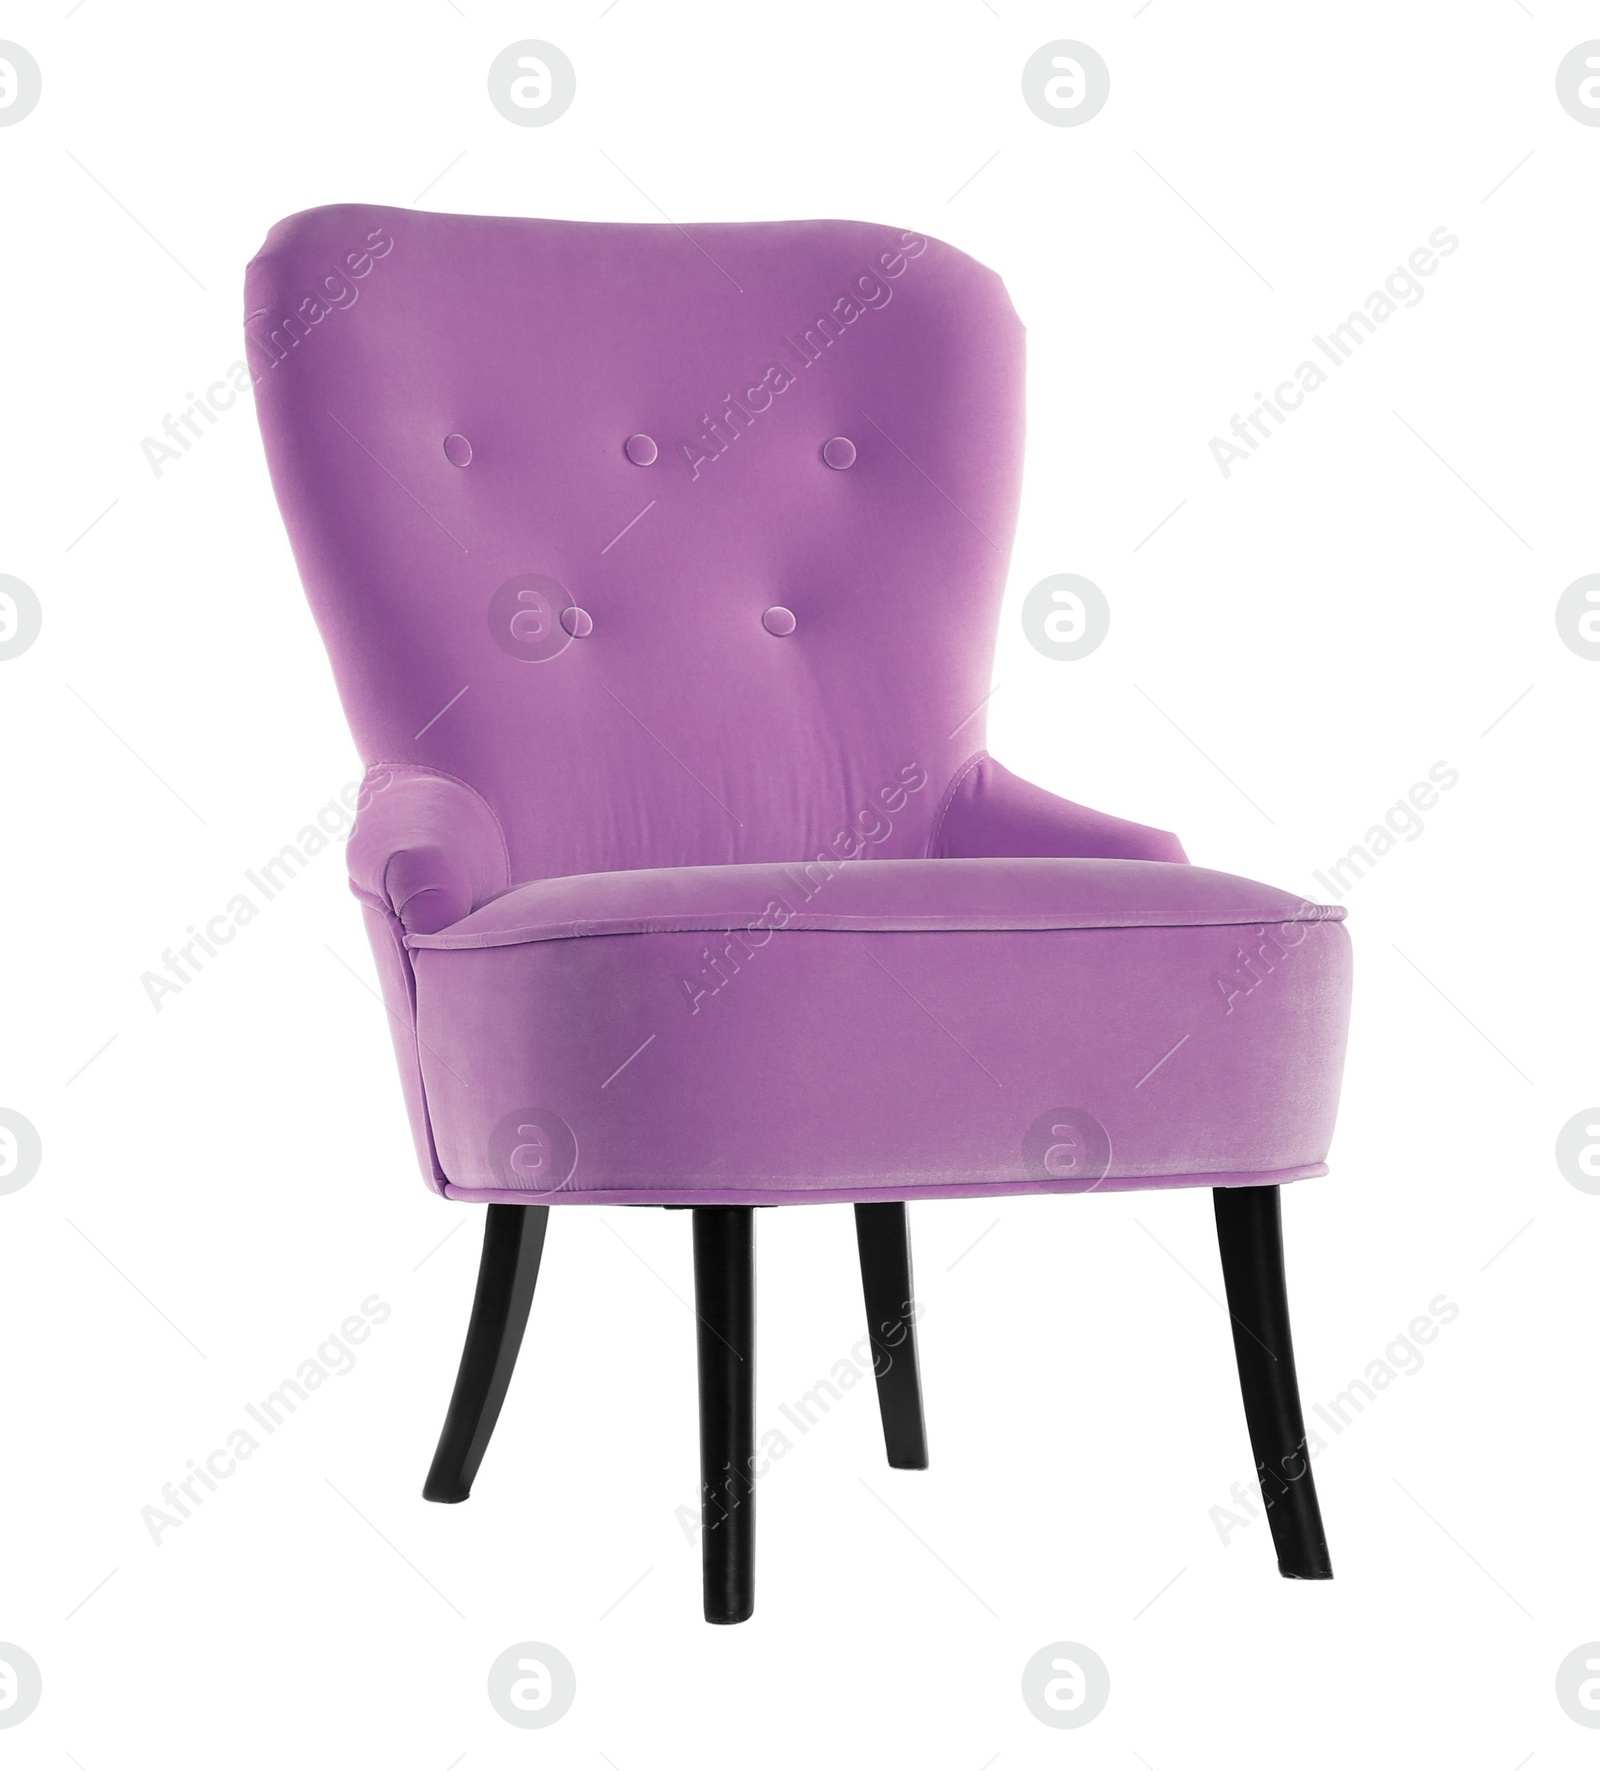 Image of One comfortable plum color armchair isolated on white